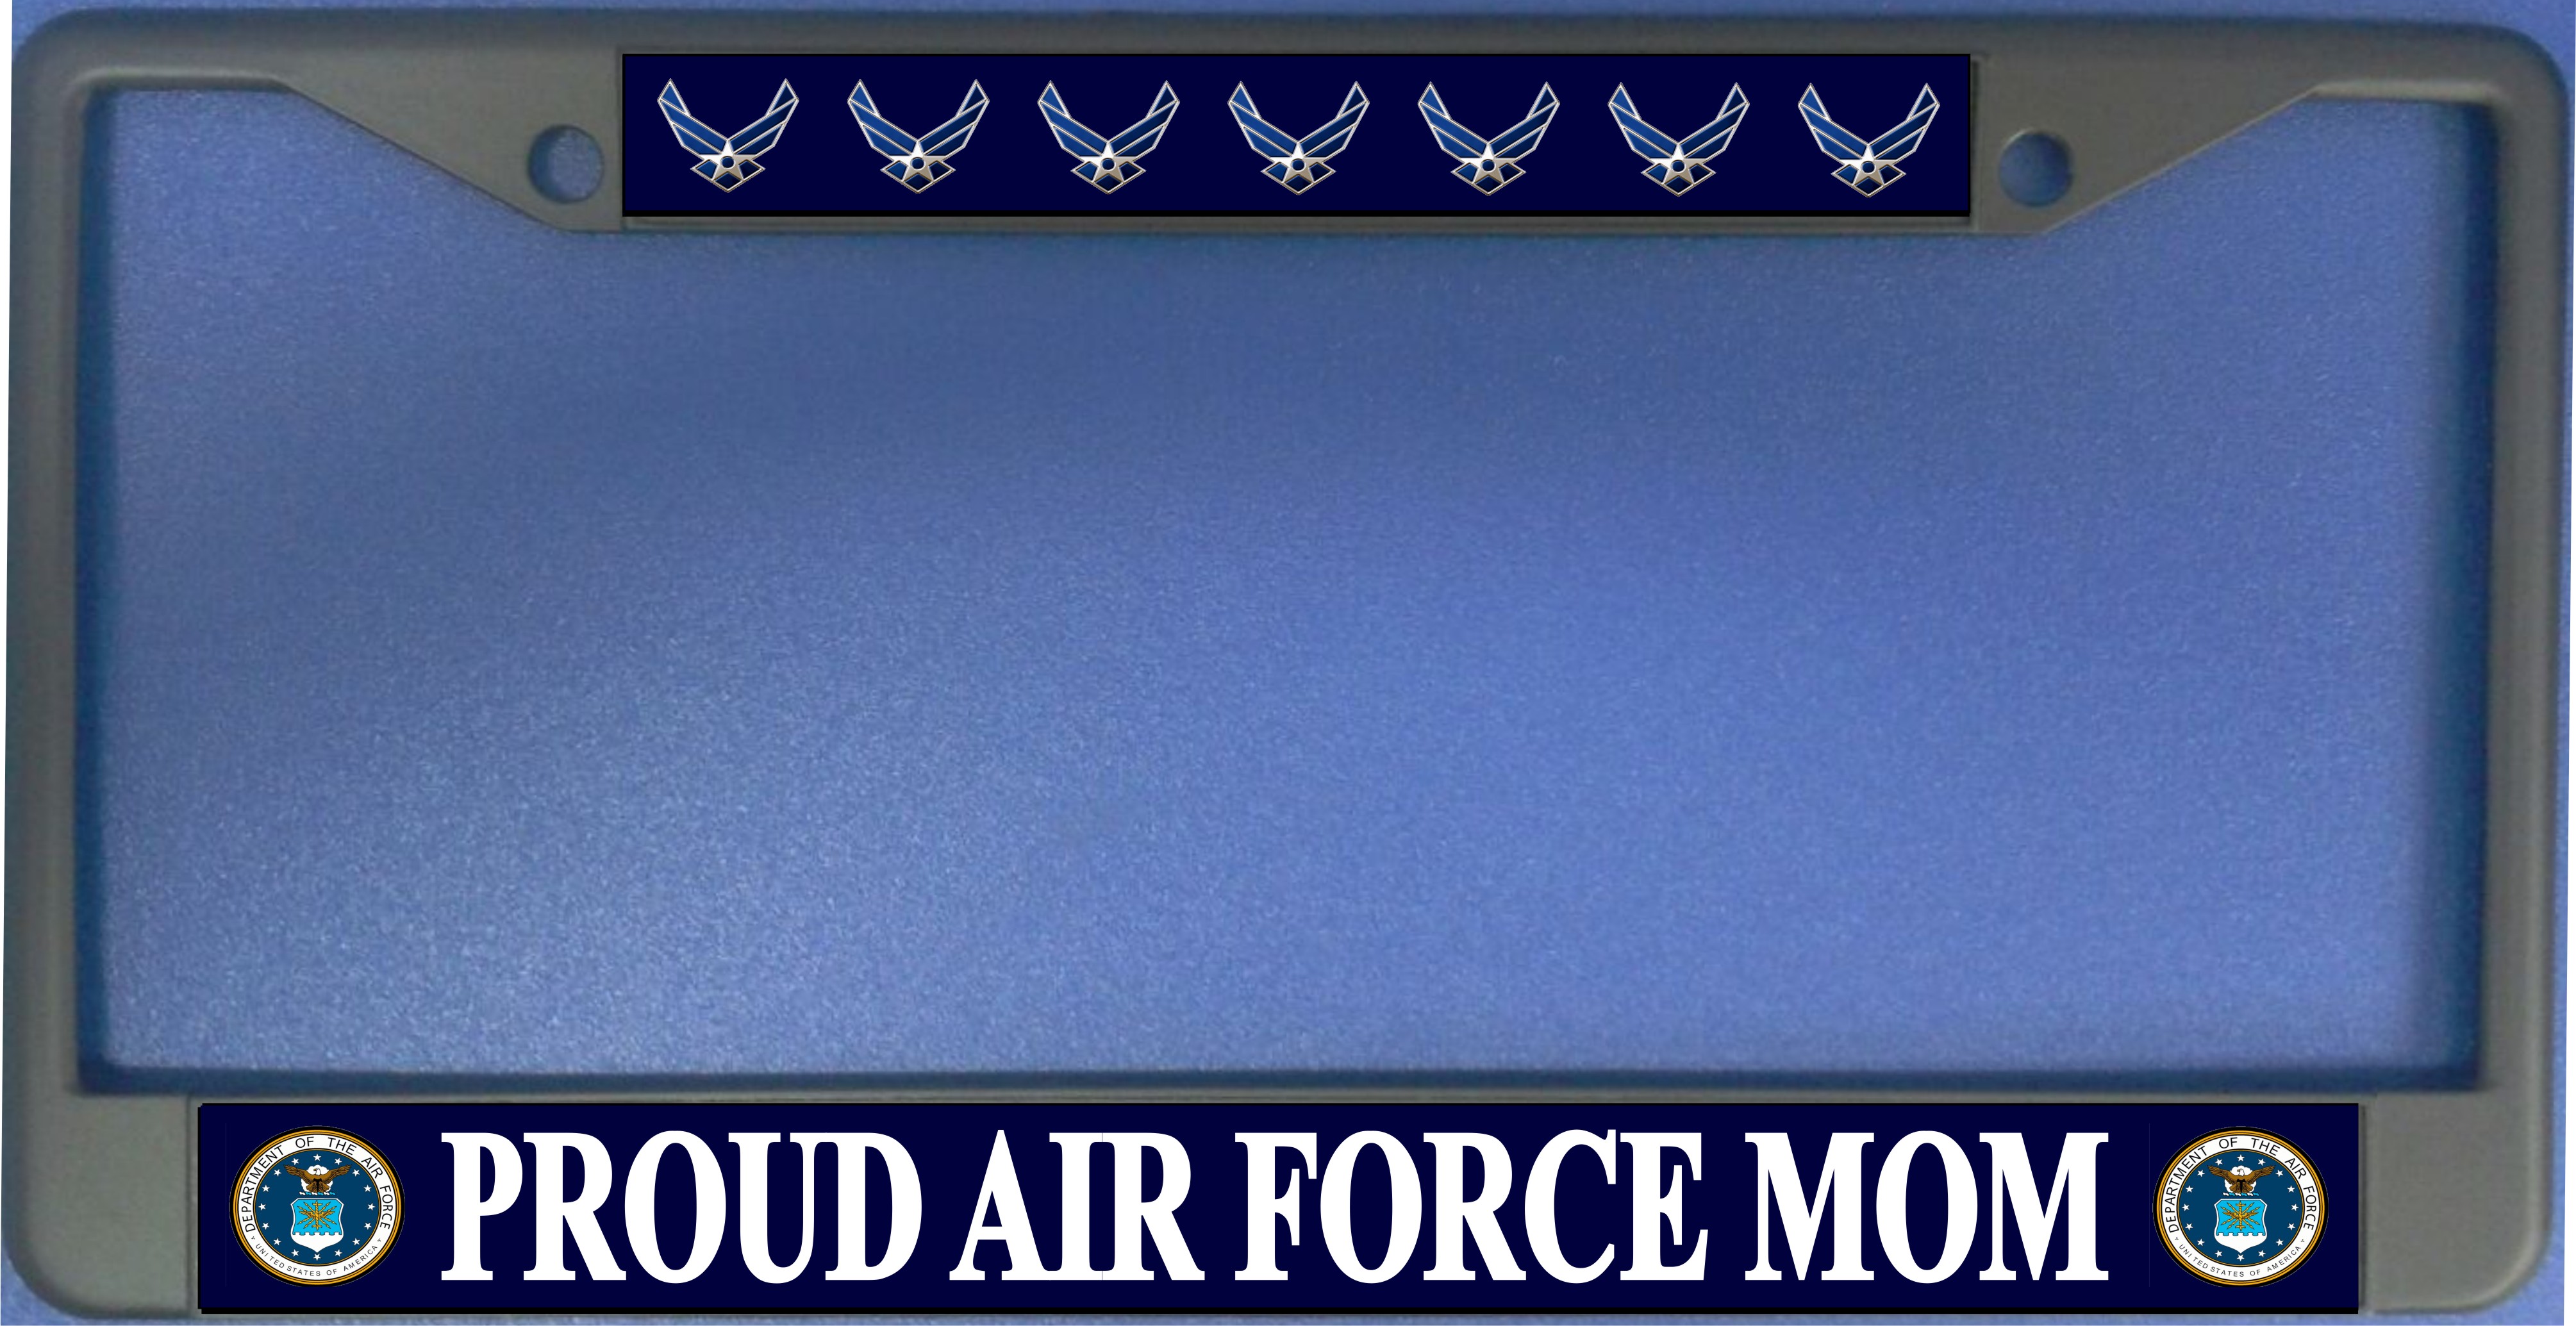 Proud Air Force Mom Photo License Plate Frame  Free SCREW Caps with this Frame